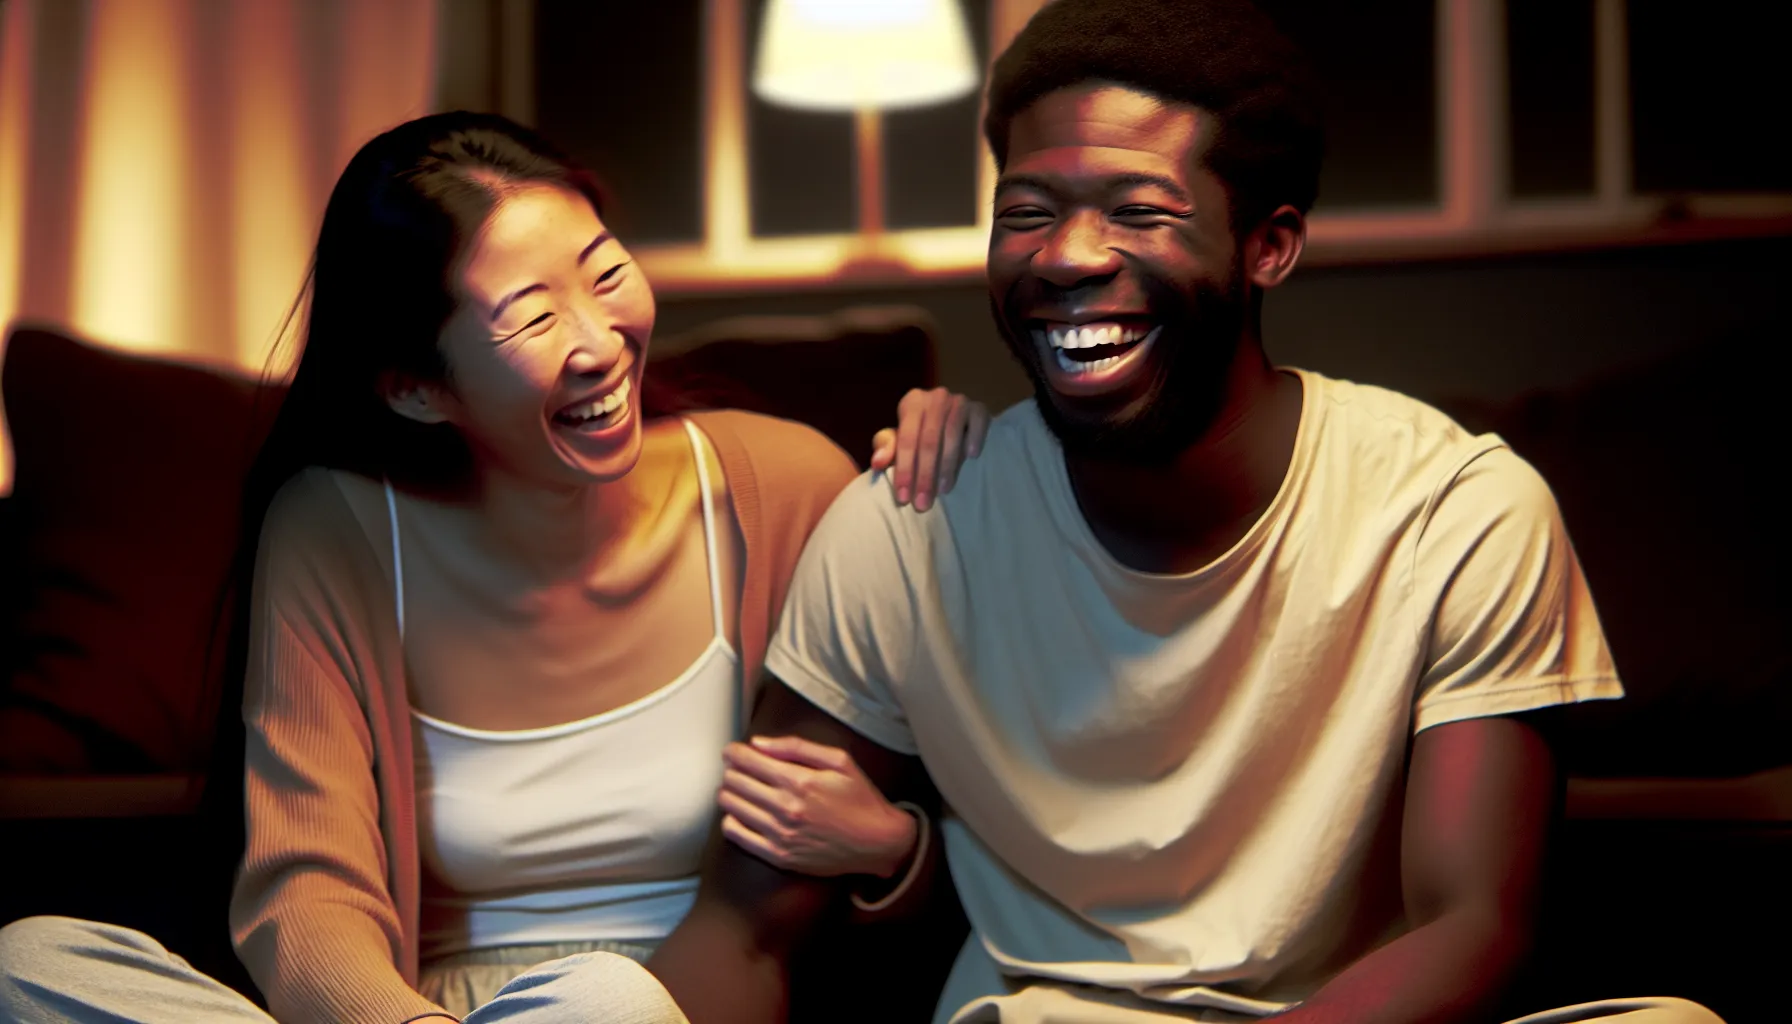 Couple Laughing Together, Strengthening Bonds